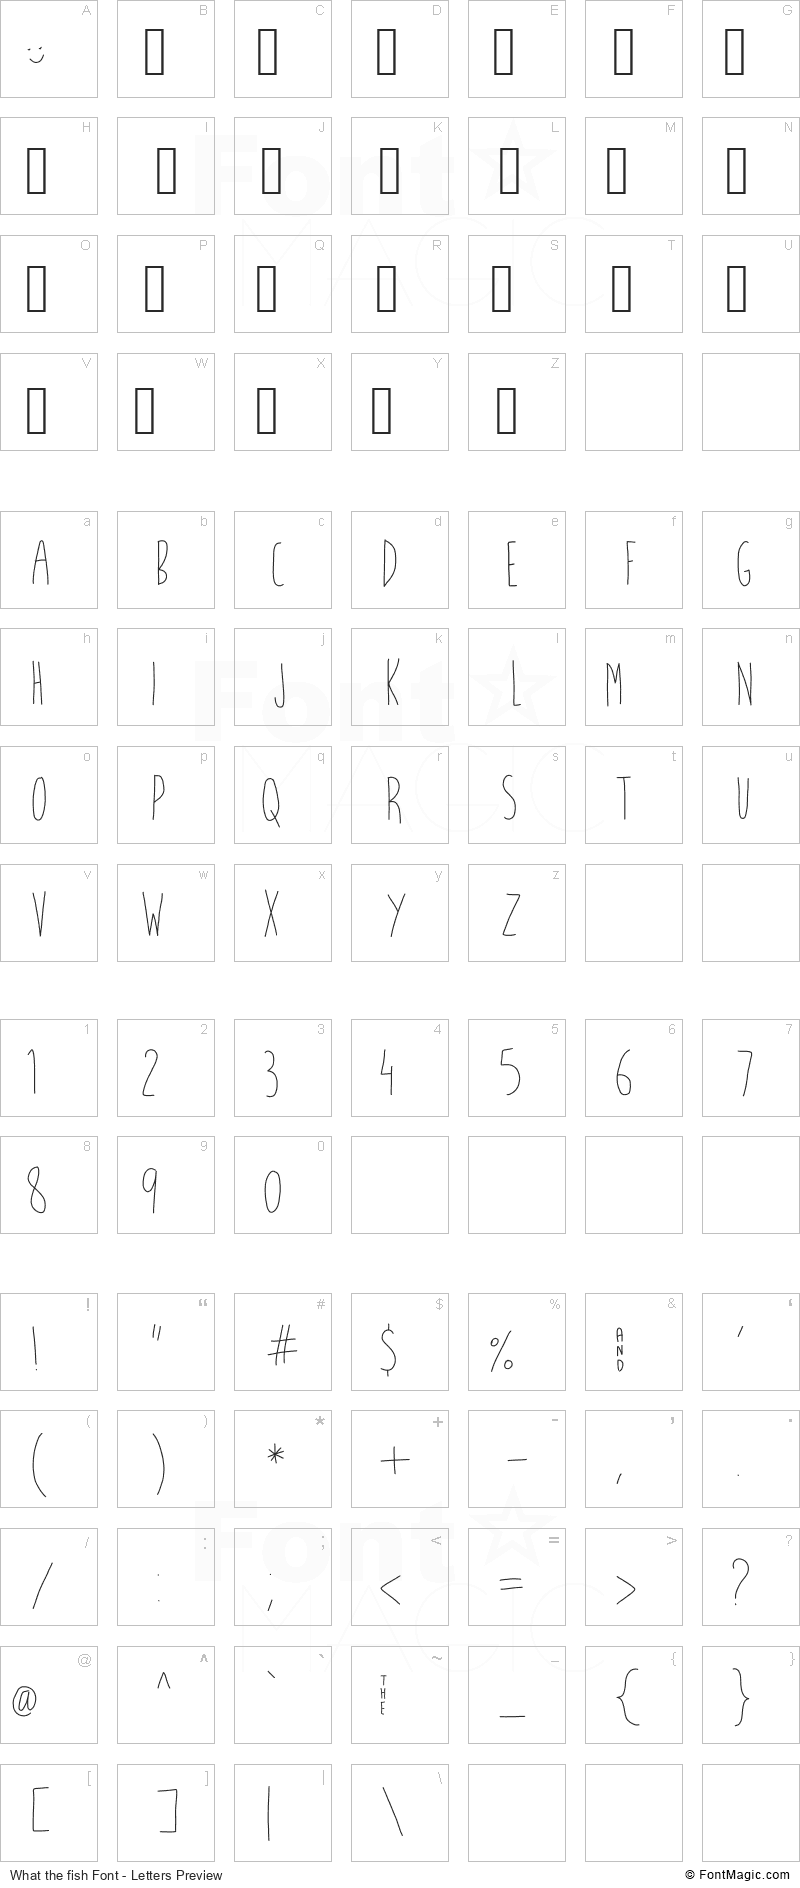 What the fish Font - All Latters Preview Chart